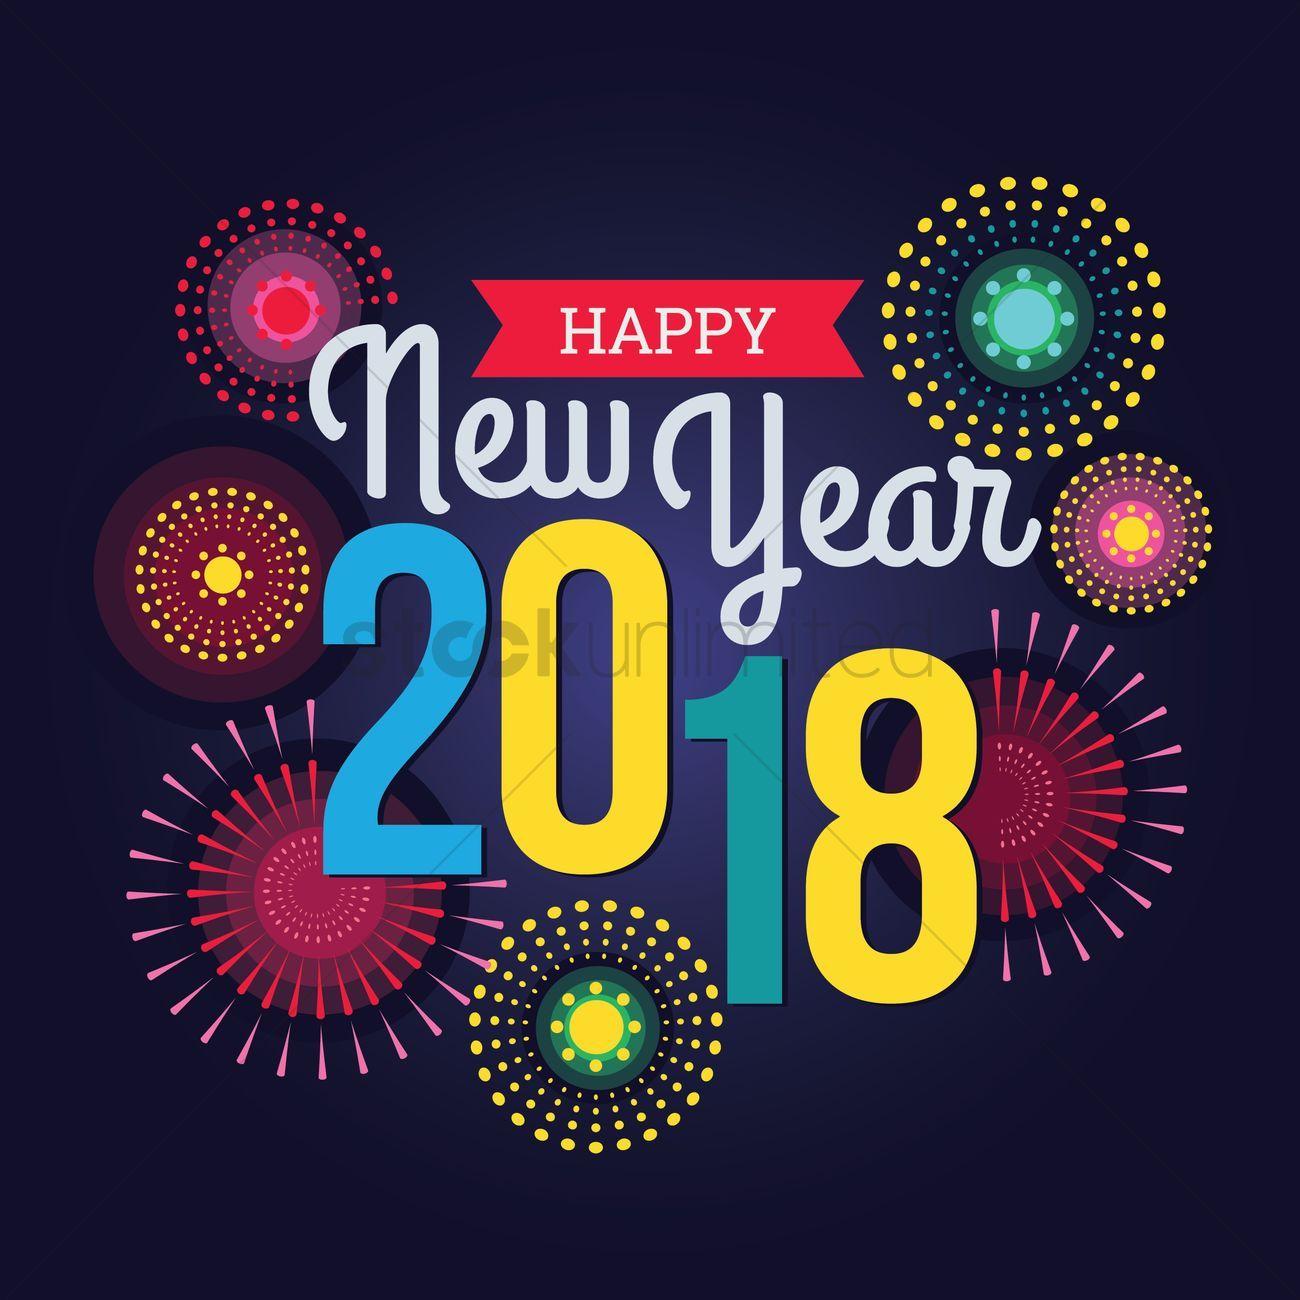 New Year 2018 Logo - Happy new year 2018 Vector Image - 2078766 | StockUnlimited